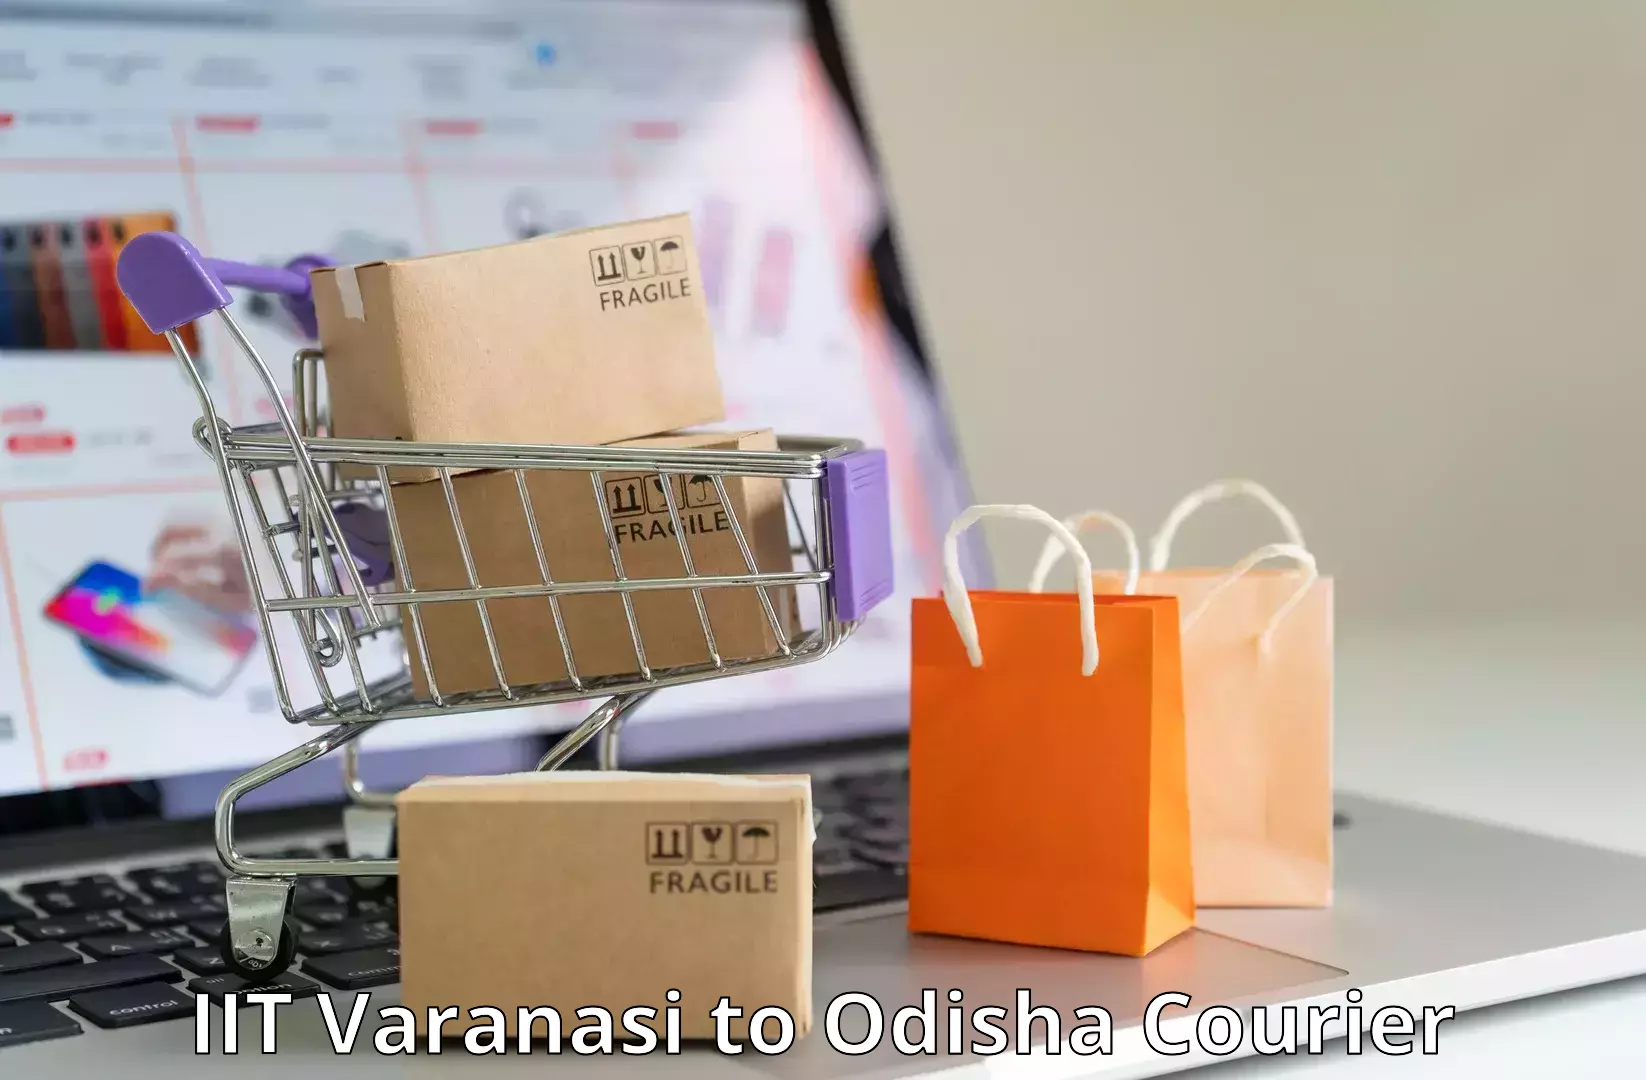 Residential courier service IIT Varanasi to Angul